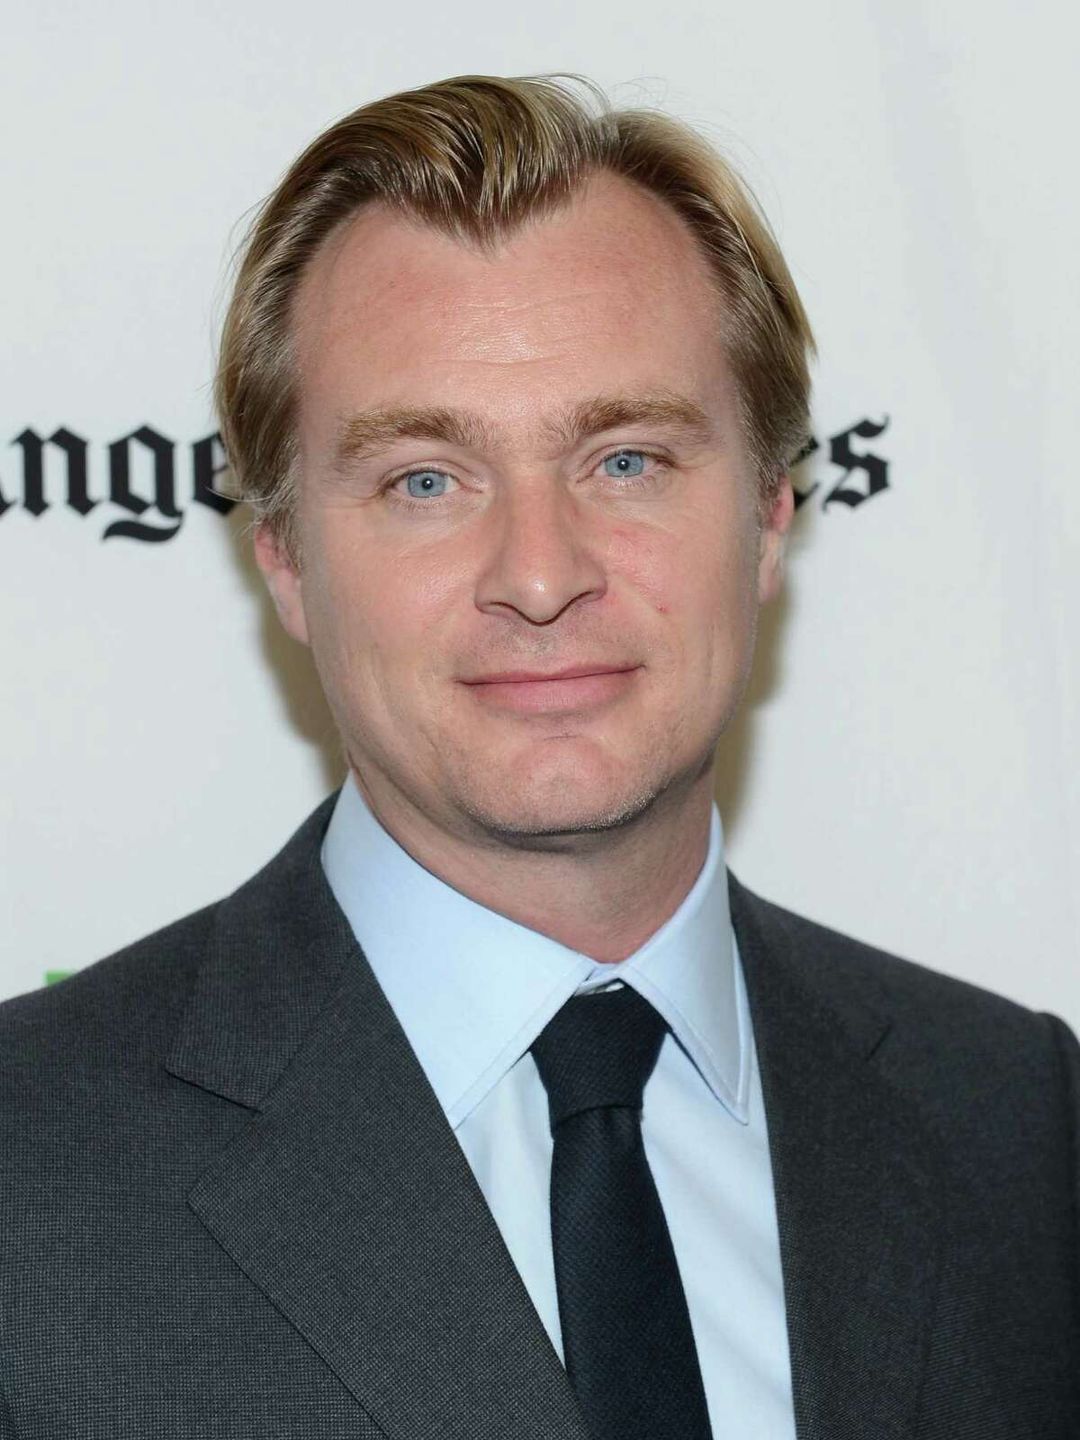 Christopher Nolan height and weight